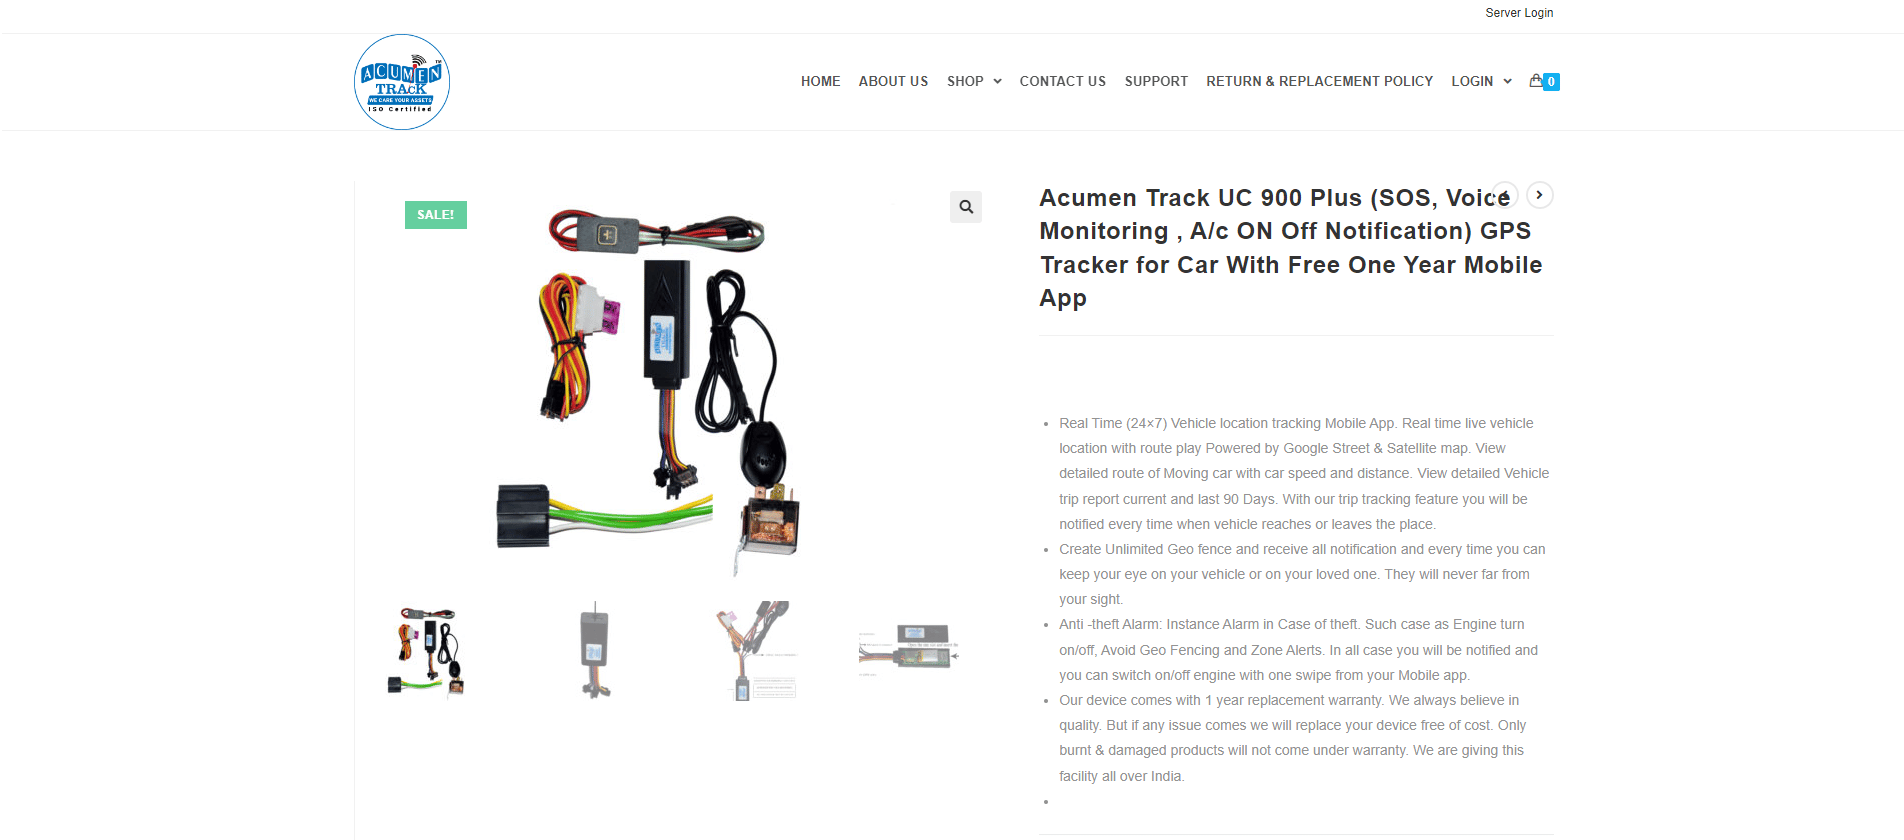 Acumen Tracker UC 900. How to Trace Your Car Online